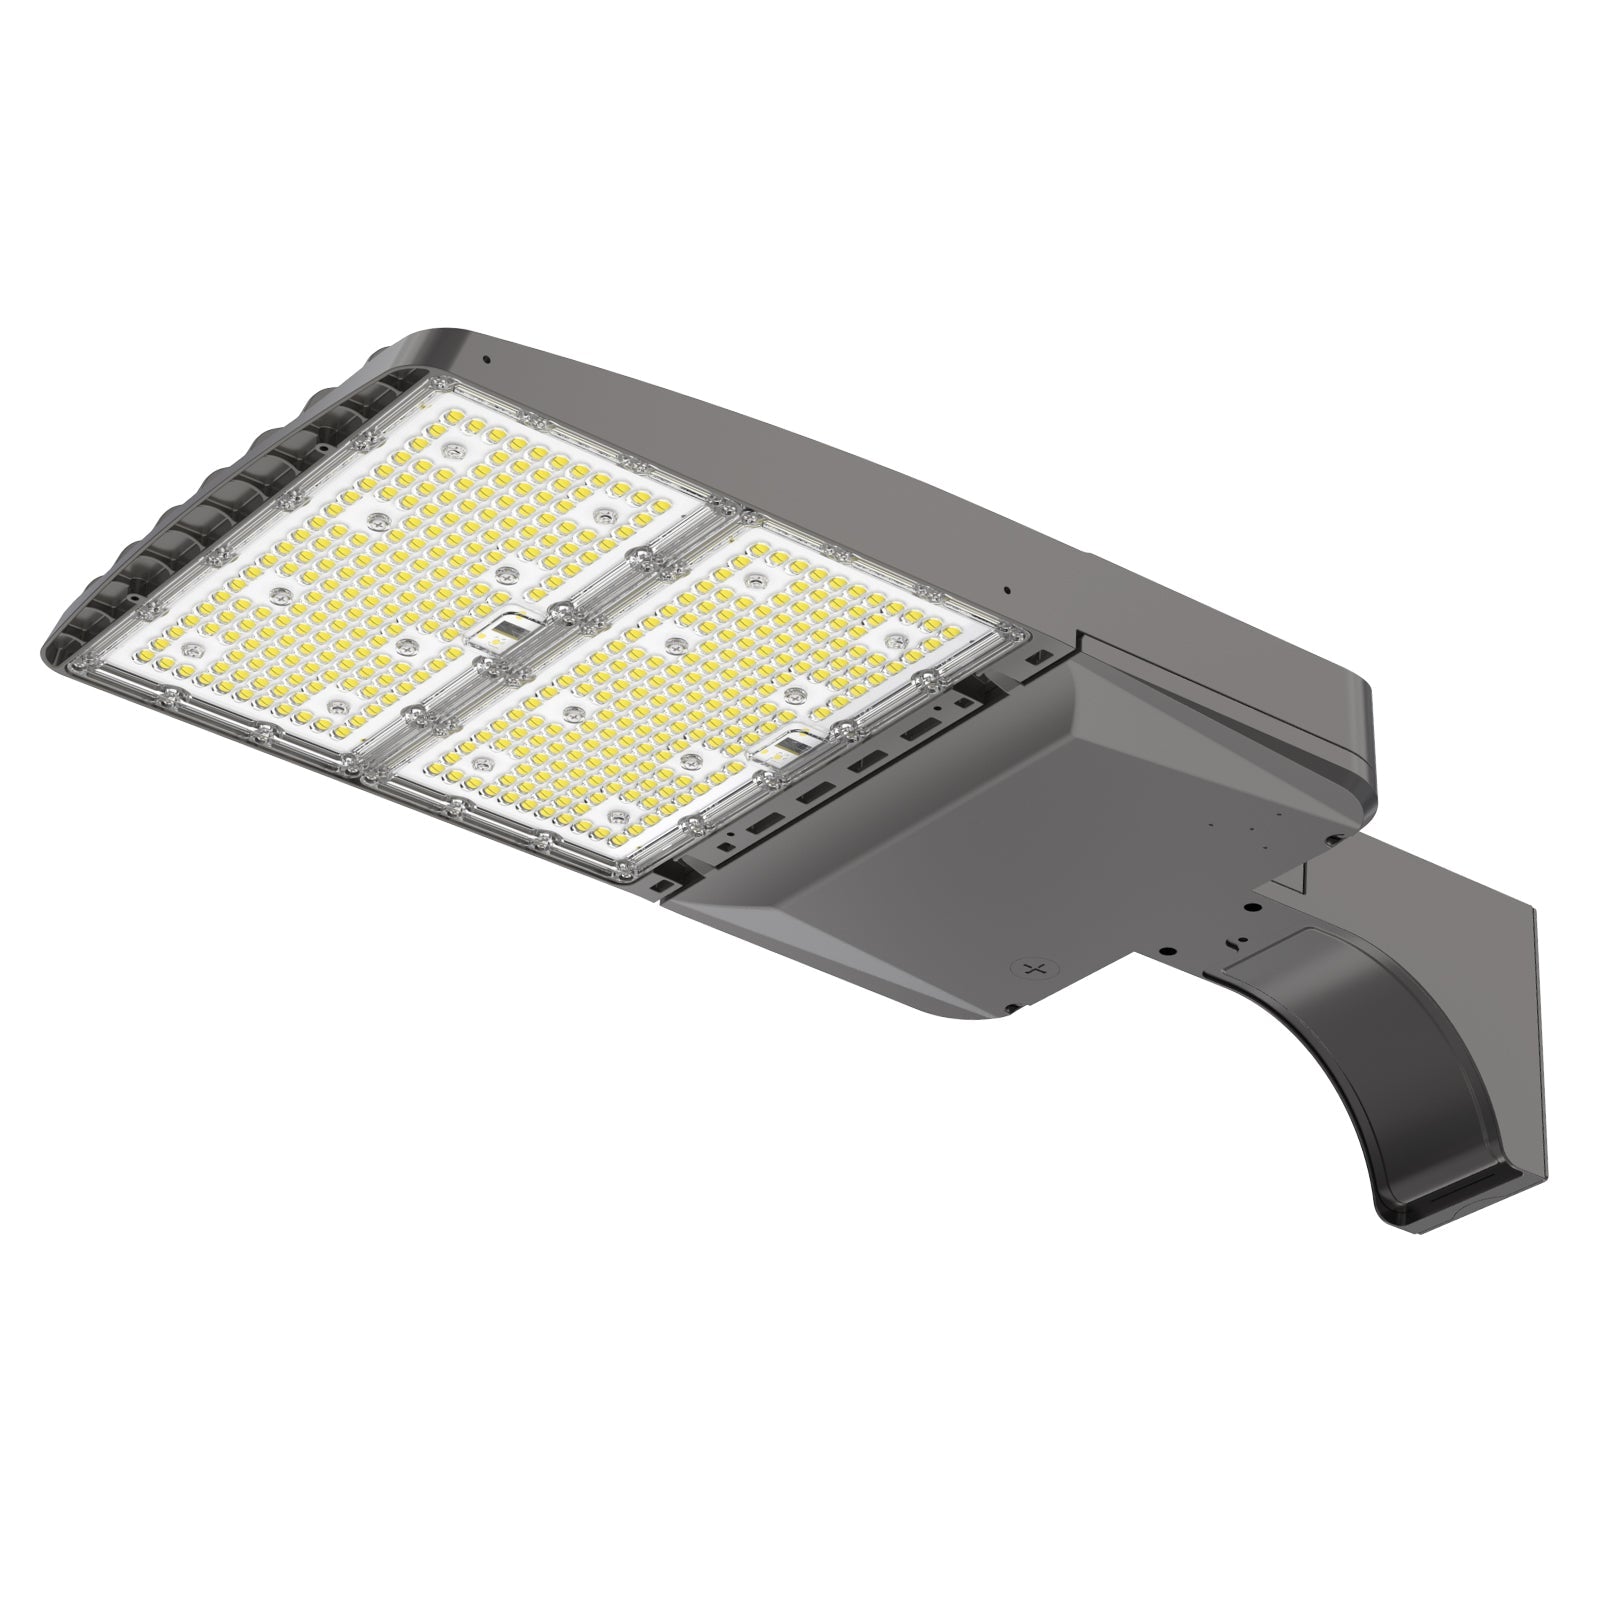 XALH Series Area Light - Without Shortcap, AC 120V-277V, 80W-310W, Selectable Wattage